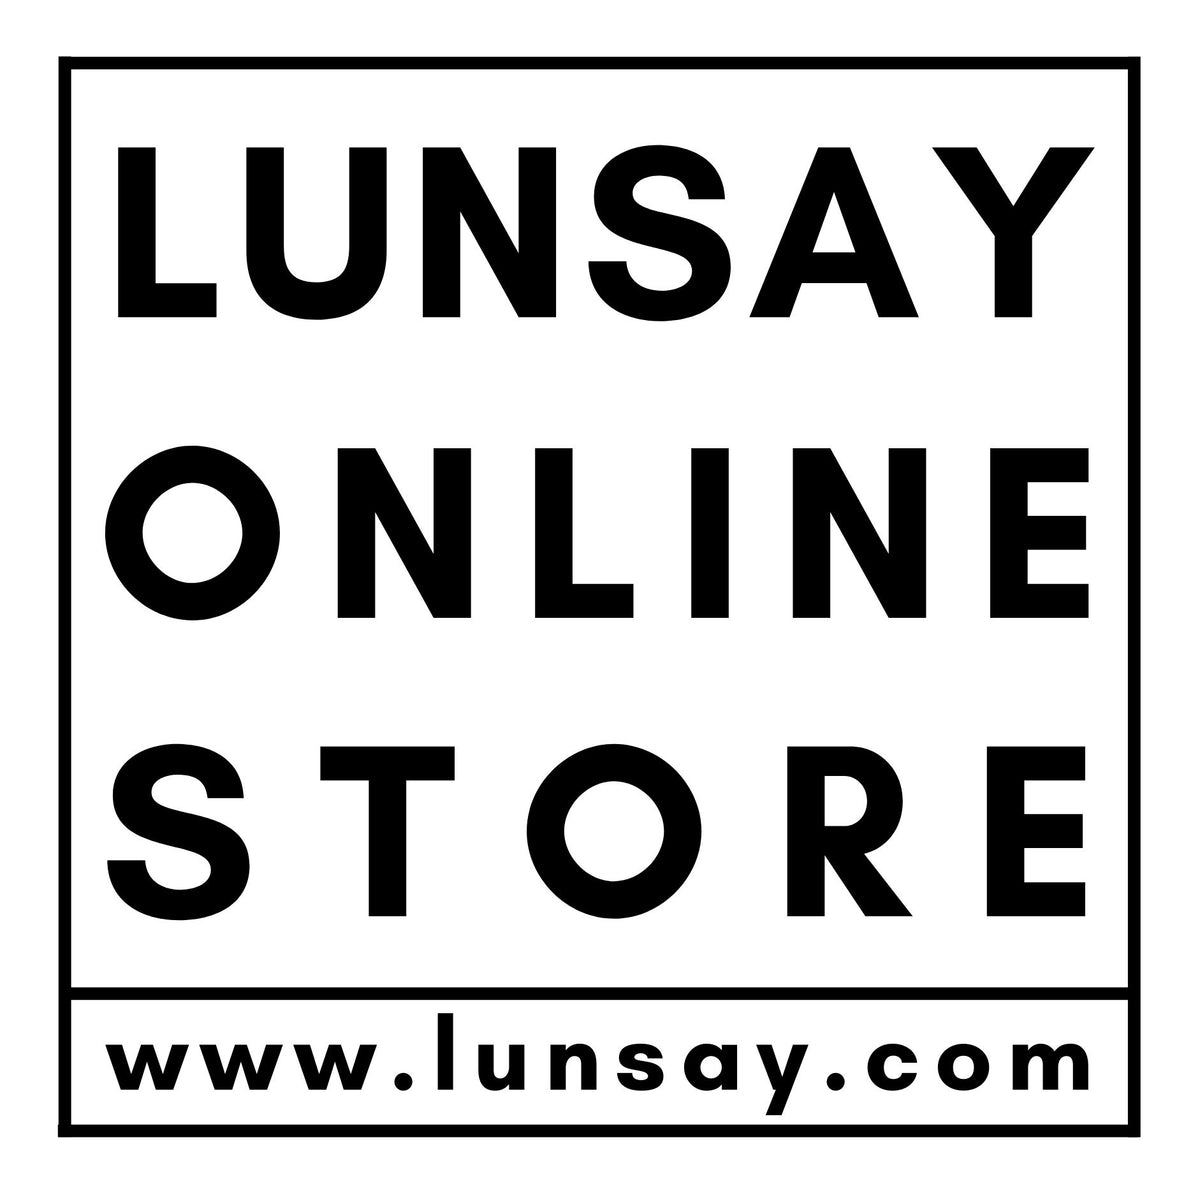 Lunsay Online Store